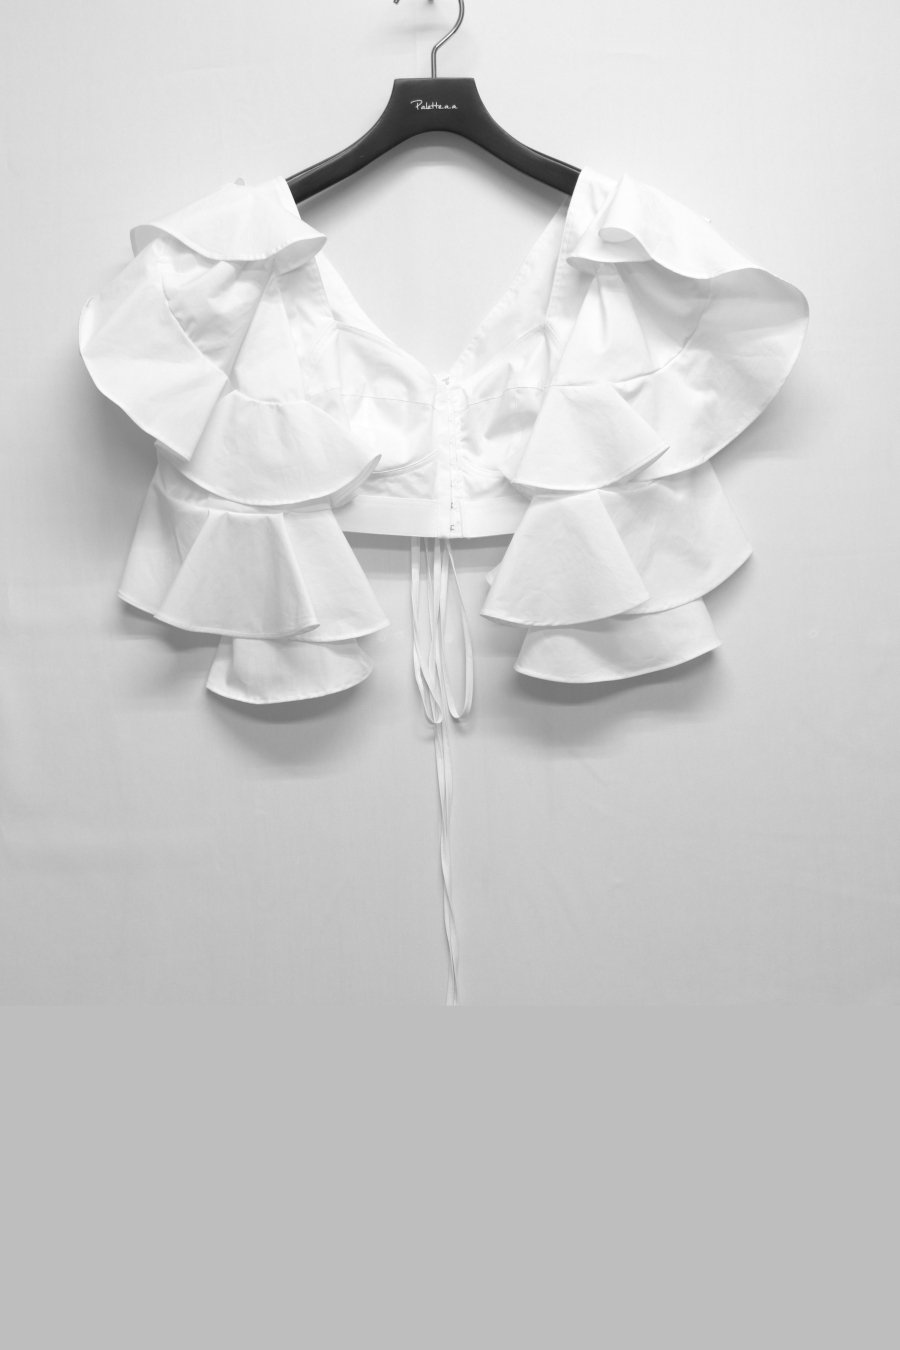 FETICO（フェティコ）のRUFFLED SLEEVE BUSTIER TOP WHITEの通販サイト